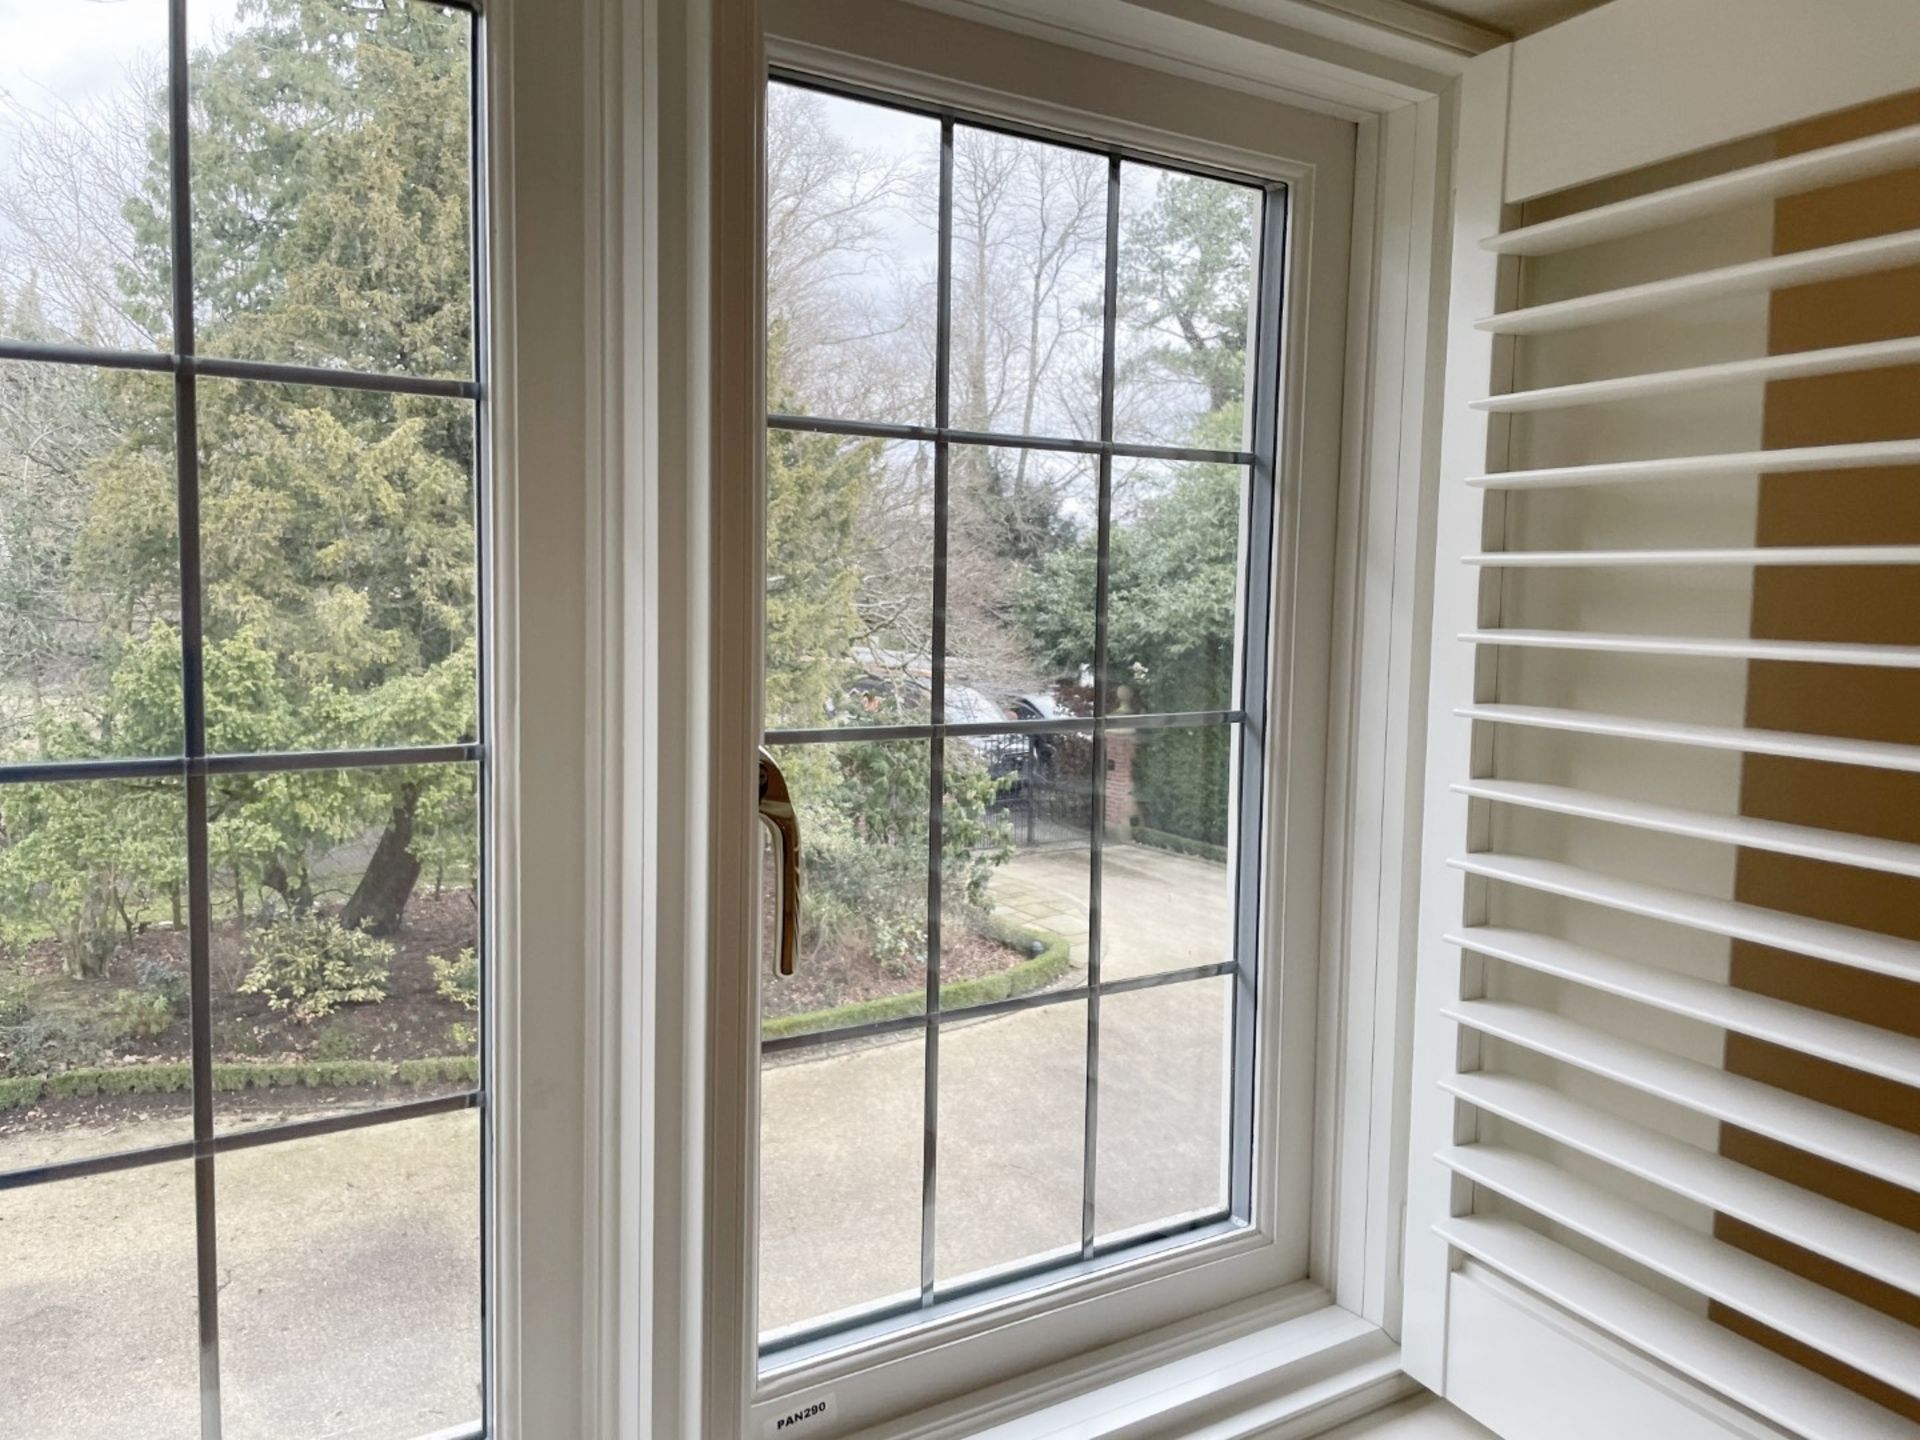 1 x Hardwood Timber Double Glazed Leaded 3-Pane Window Frame - Ref: PAN290 / FRNT WIN - CL896 - NO - Image 10 of 10